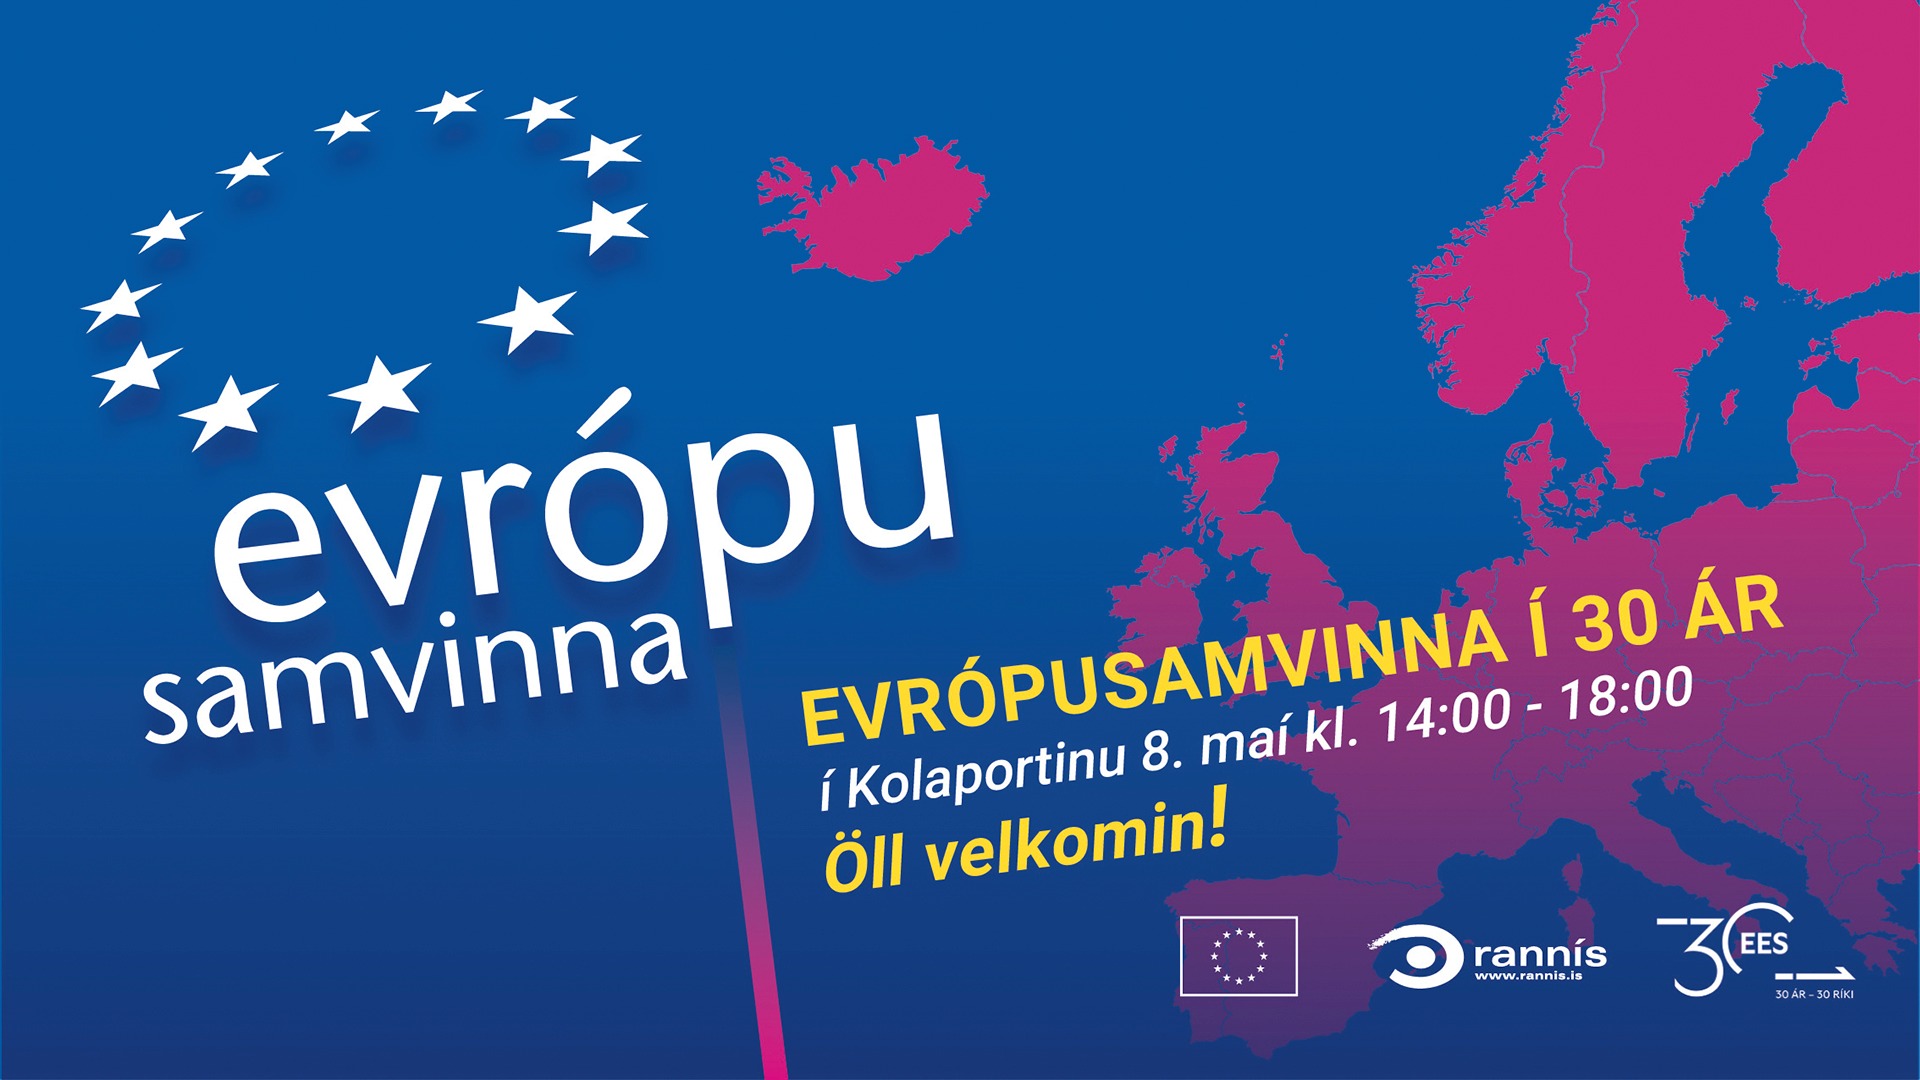 Rannís Event for European Cooperation for 30 years